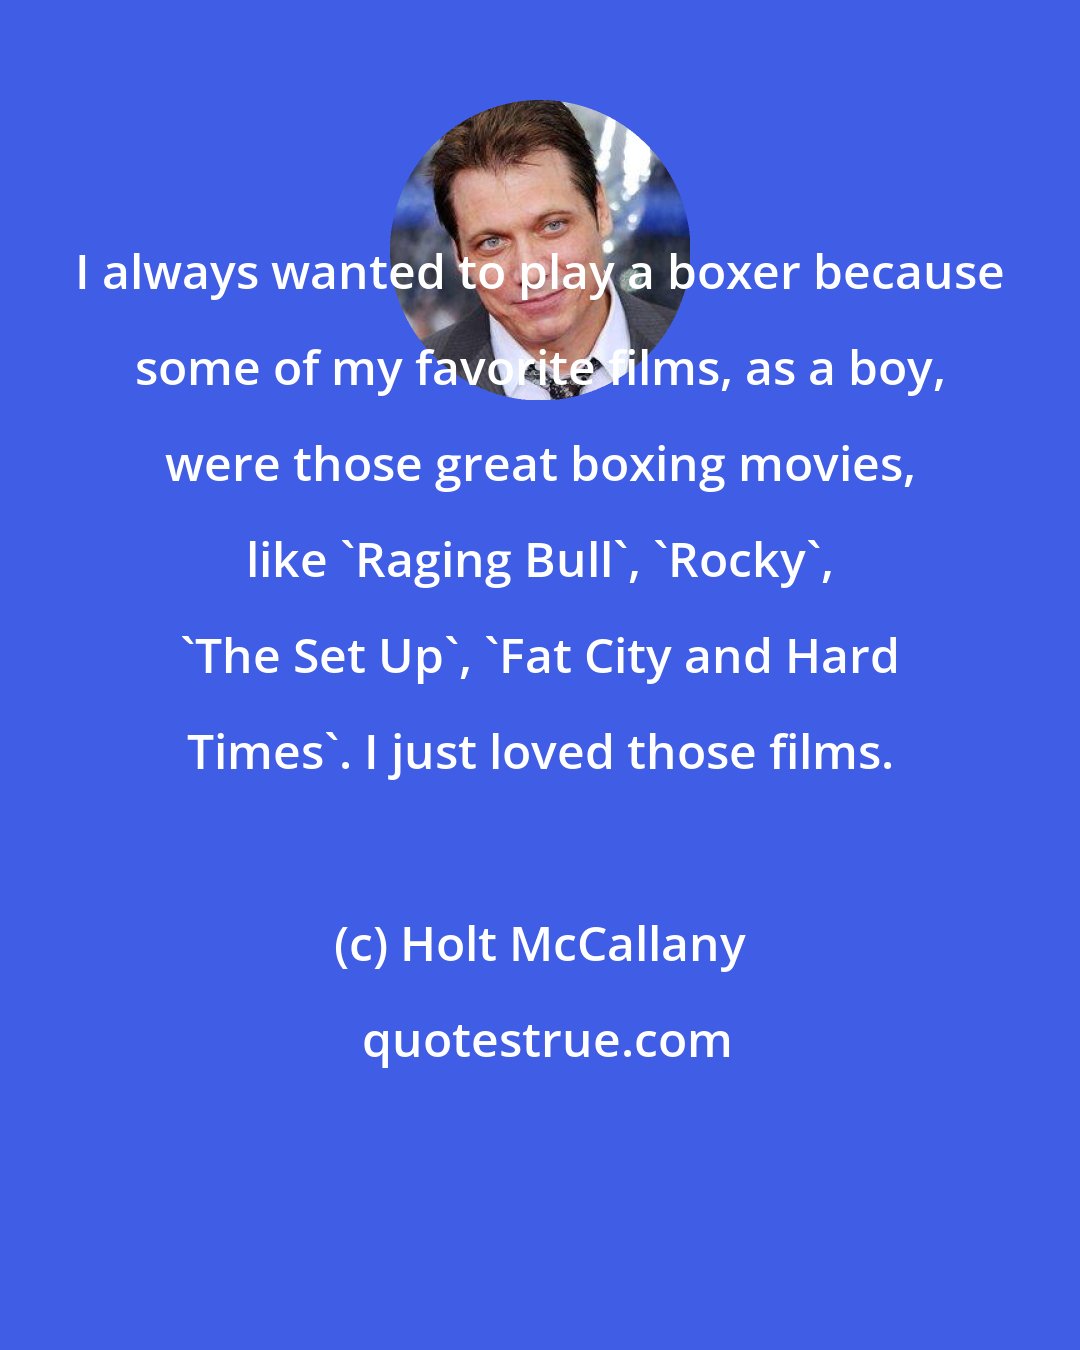 Holt McCallany: I always wanted to play a boxer because some of my favorite films, as a boy, were those great boxing movies, like 'Raging Bull', 'Rocky', 'The Set Up', 'Fat City and Hard Times'. I just loved those films.